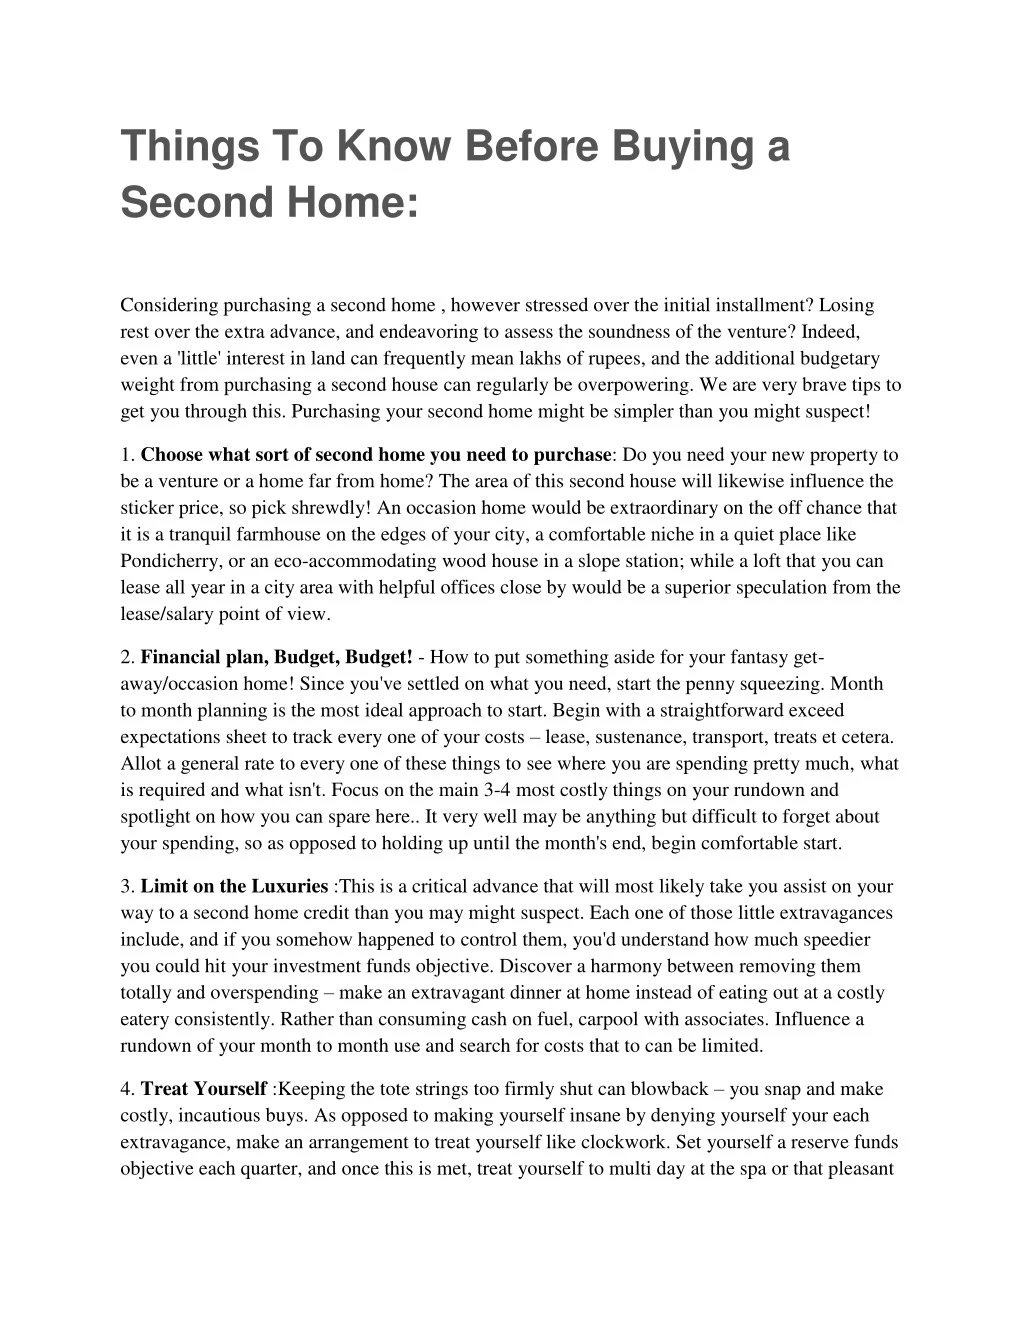 things to know before buying a second home